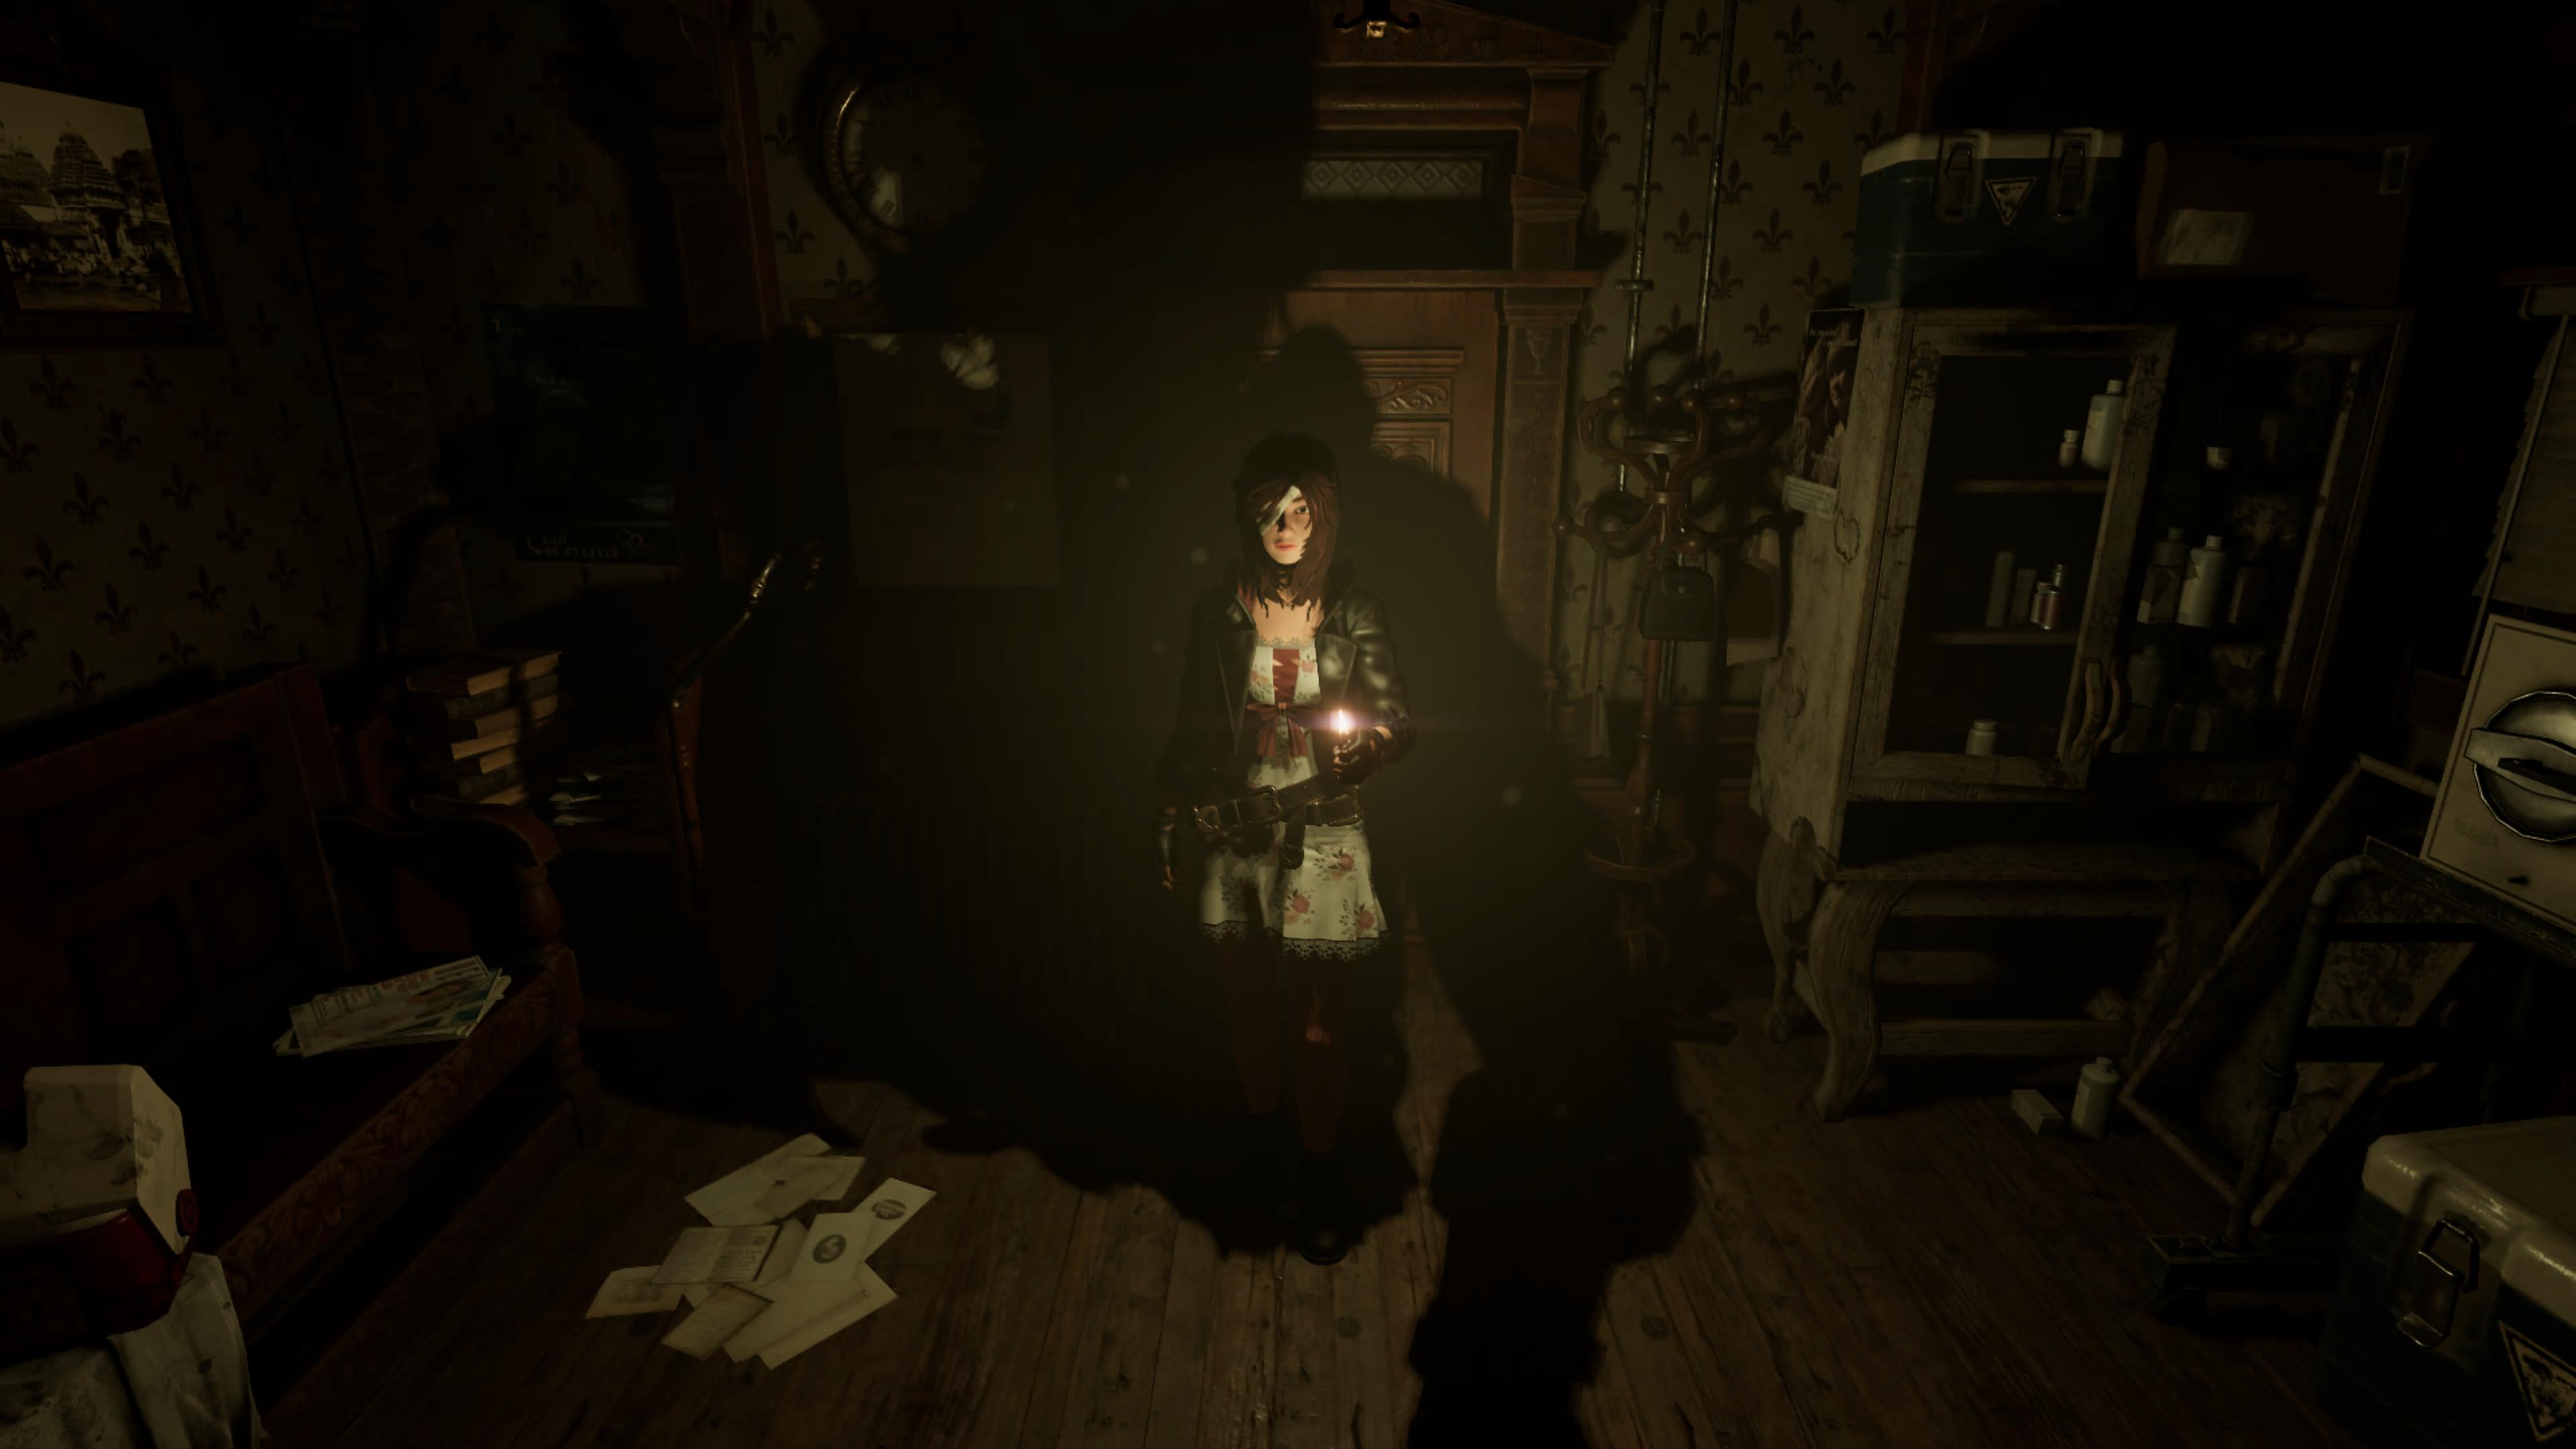 Get Your Survival Horror Fix With 'Forgotten Memories' - Bloody Disgusting